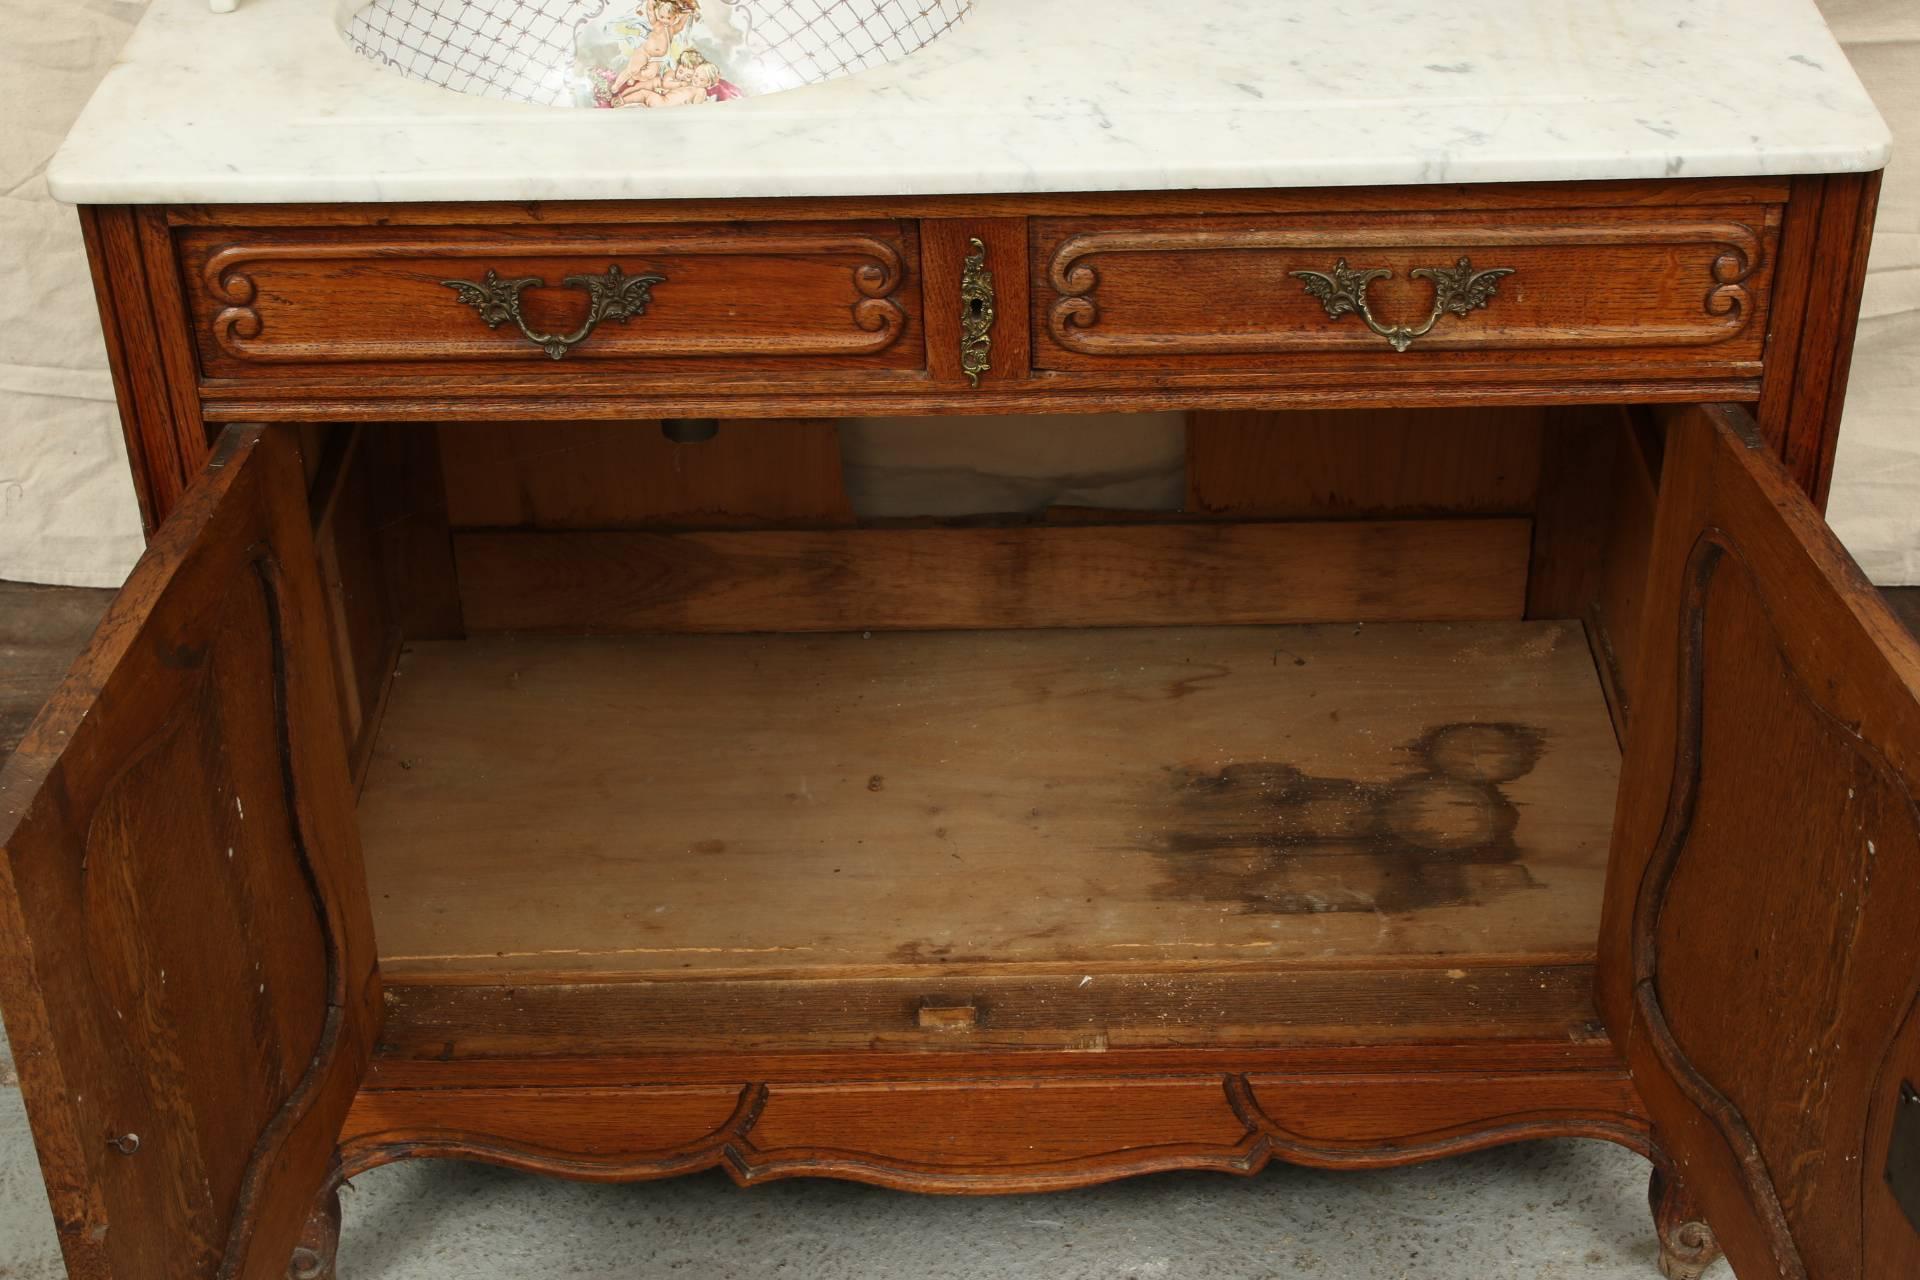 French country style double door oak cabinet with shaped framed panels and two short apron drawers. A triple hinged and bevelled mirror with carved frame and cartouche crest at the top back. A marble shelf with marble side supports sits above the